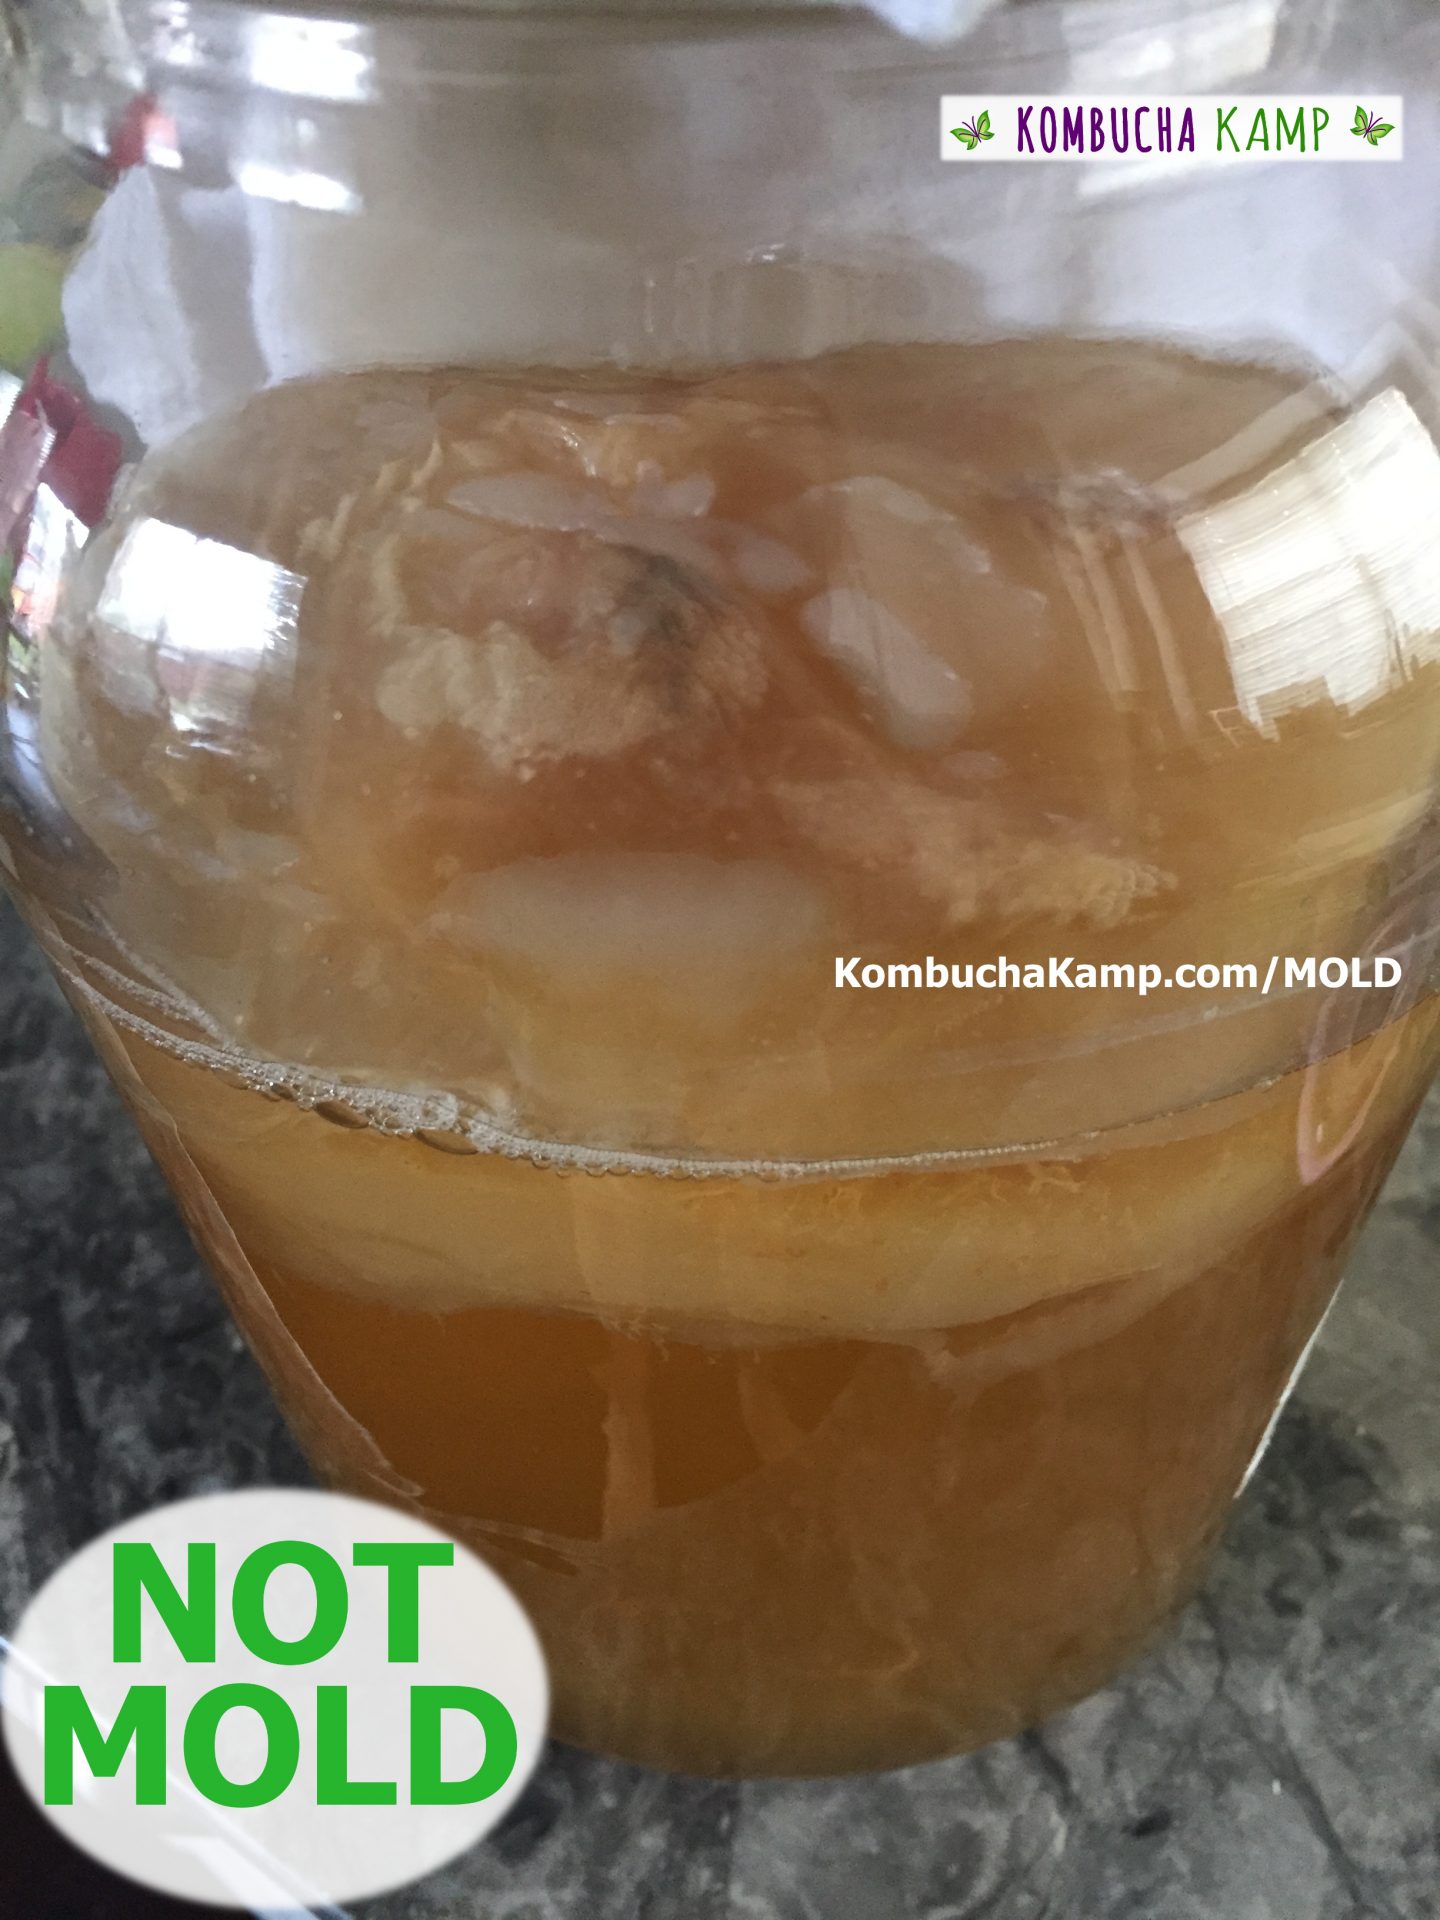 Area of new SCOBY growth forming over the Kombucha brew with yeast and the original culture floating beneath the surface, no mold